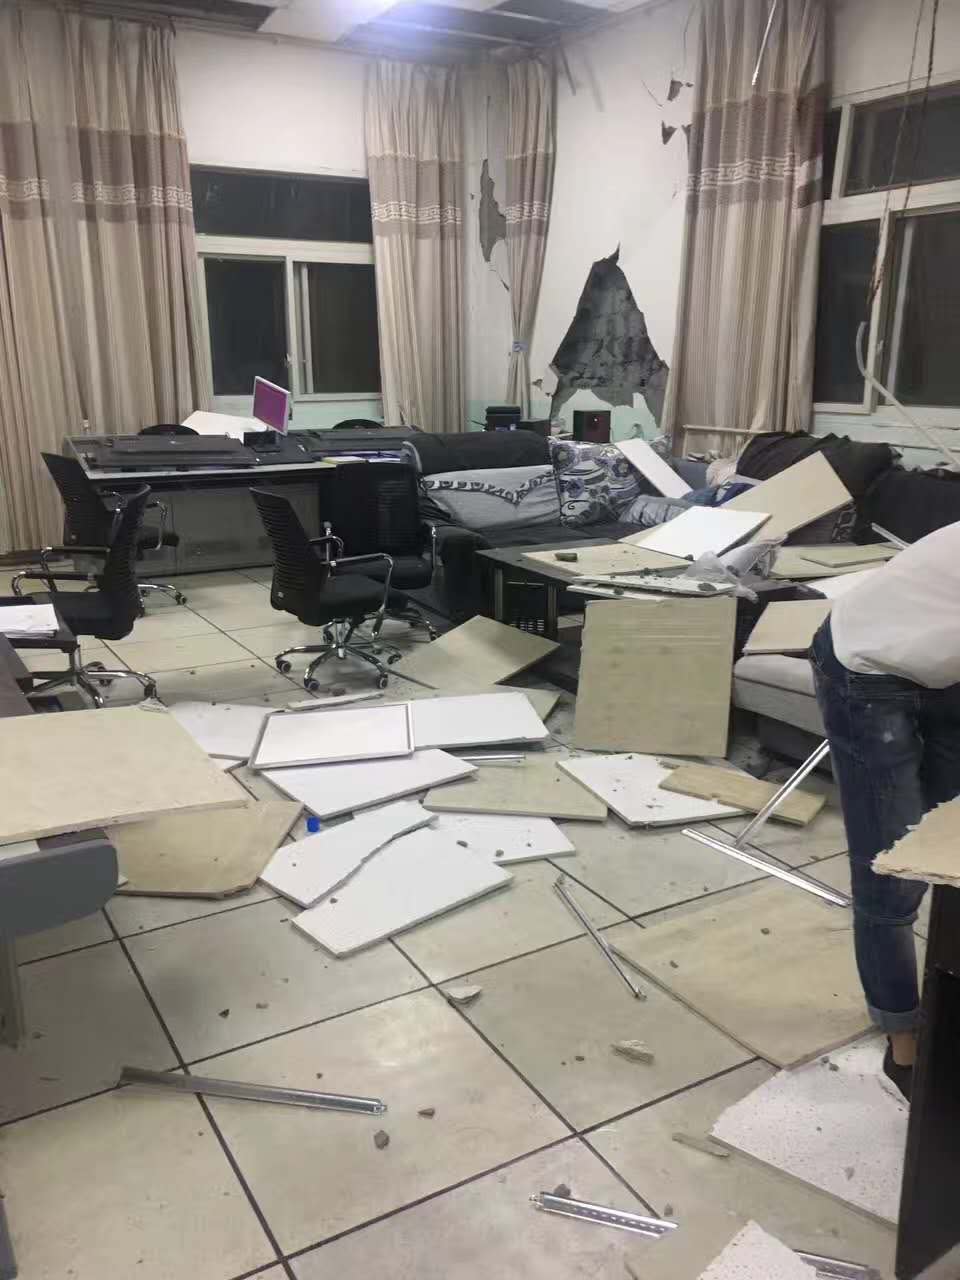 <p>Tiles fall off inside a house at Jiuzhaigou County on Aug. 9, 2017 in Tibetan and Qiang autonomous prefecture of Aba, Sichuan Province of China. A magnitude-7.0 earthquake struck Jiuzhaigou County at 9:19 pm on Tuesday. (Photo: VCG via Getty Images) </p>